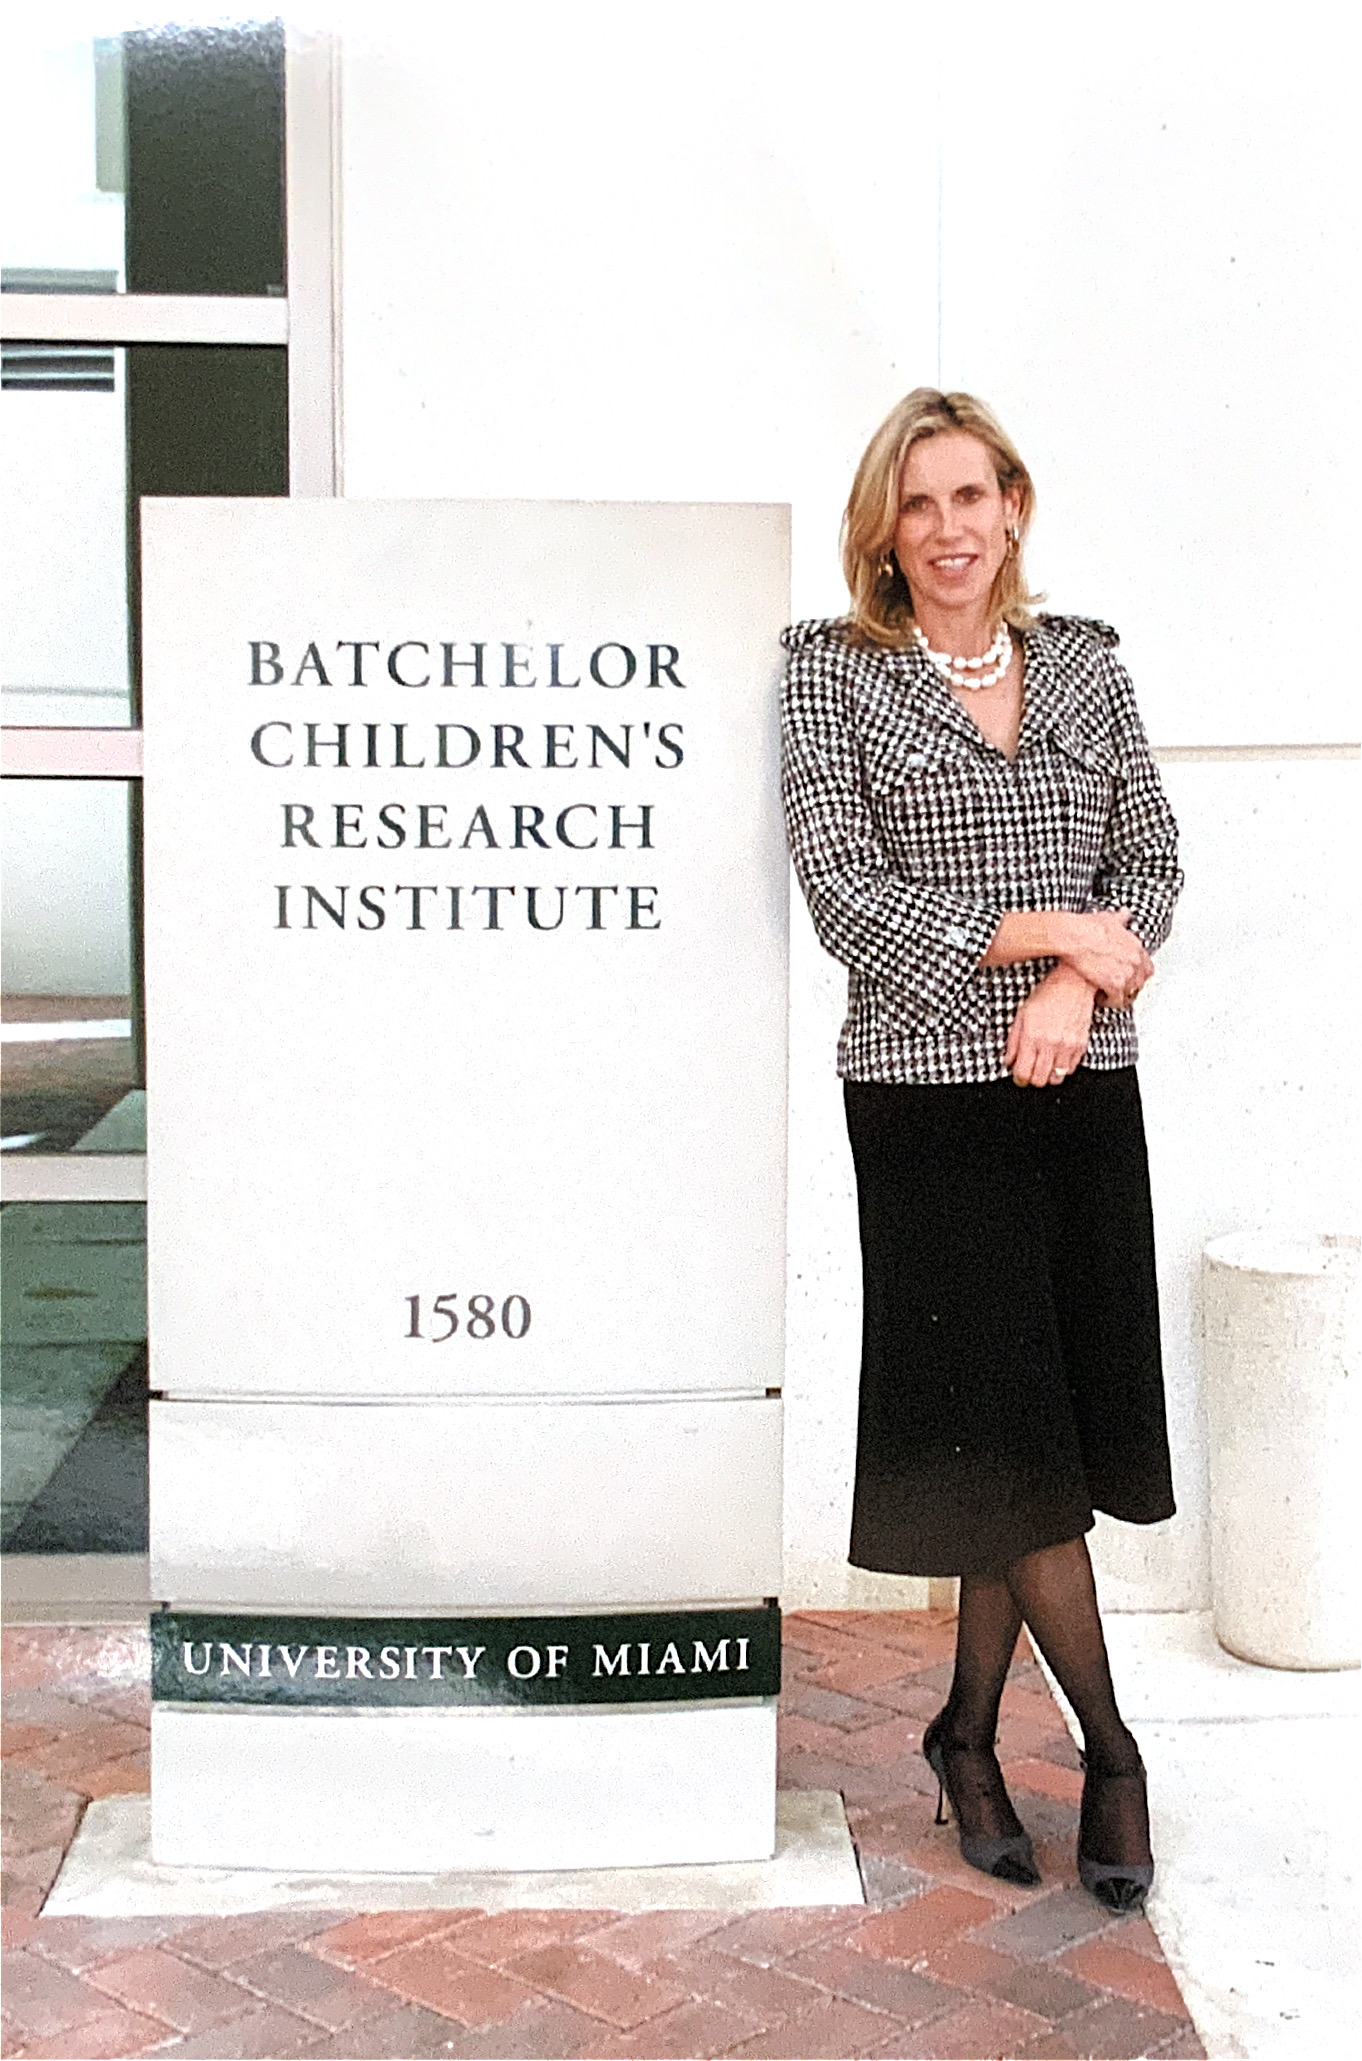 The Batchelor Foundation’s commitments to the University of Miami.